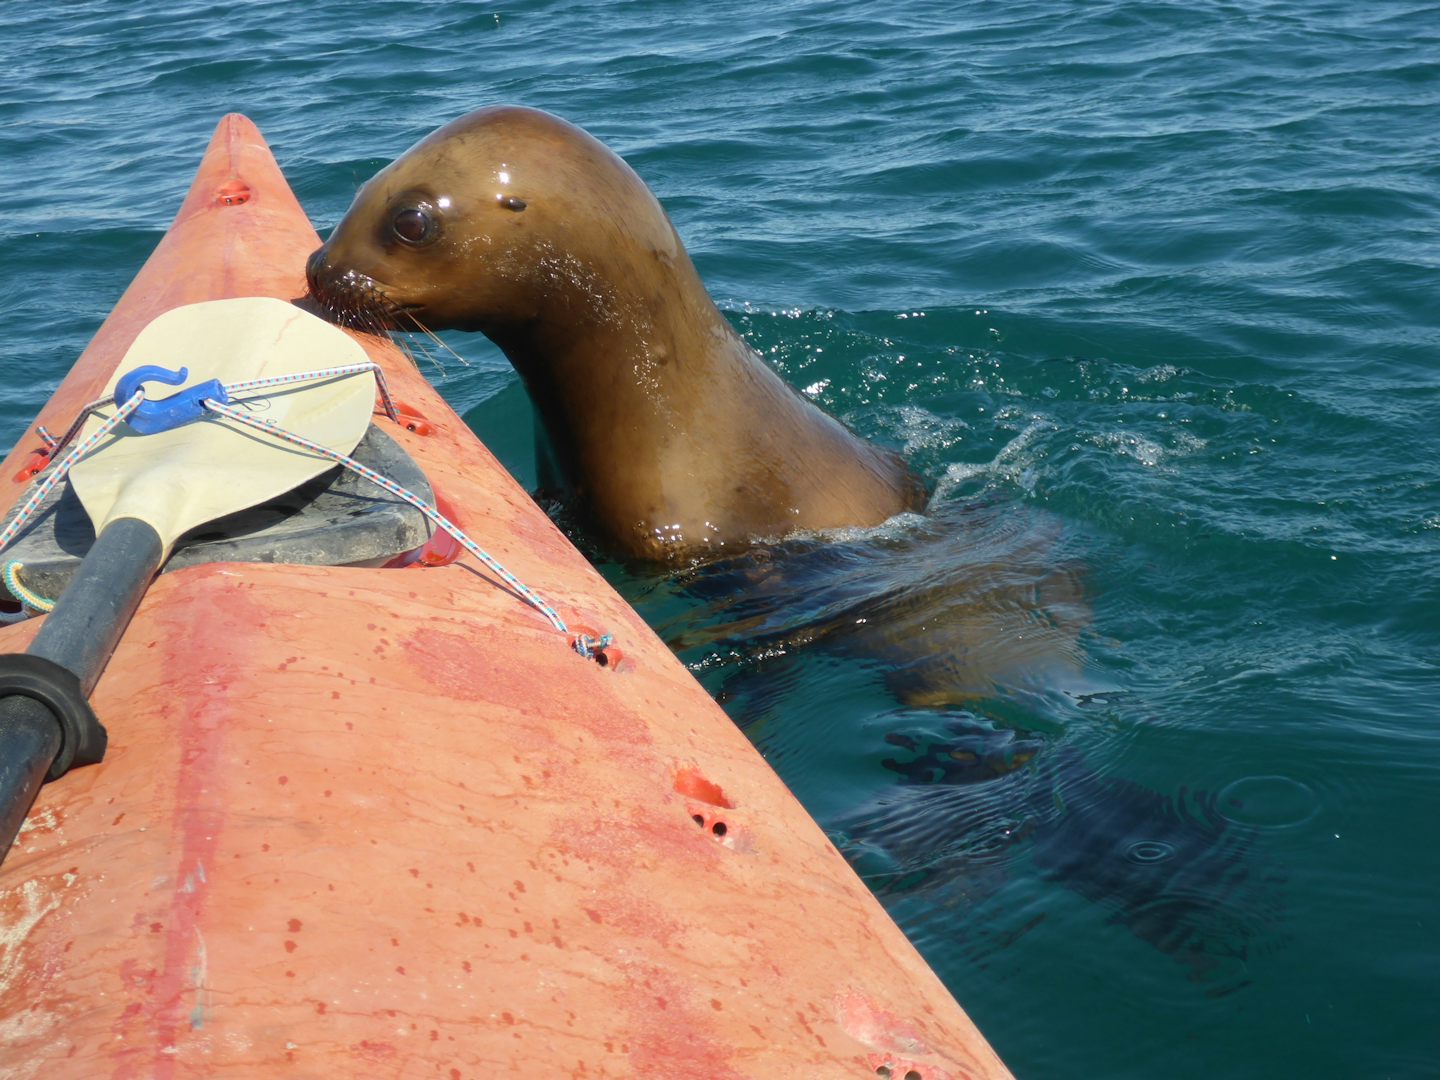 While sea Kayaking with Sea Lions, this one got up close and personal.  It eventually climbed on top of the Kayak.  The guide was great, he held our Kayak steady so we did not swim with the sea lions.